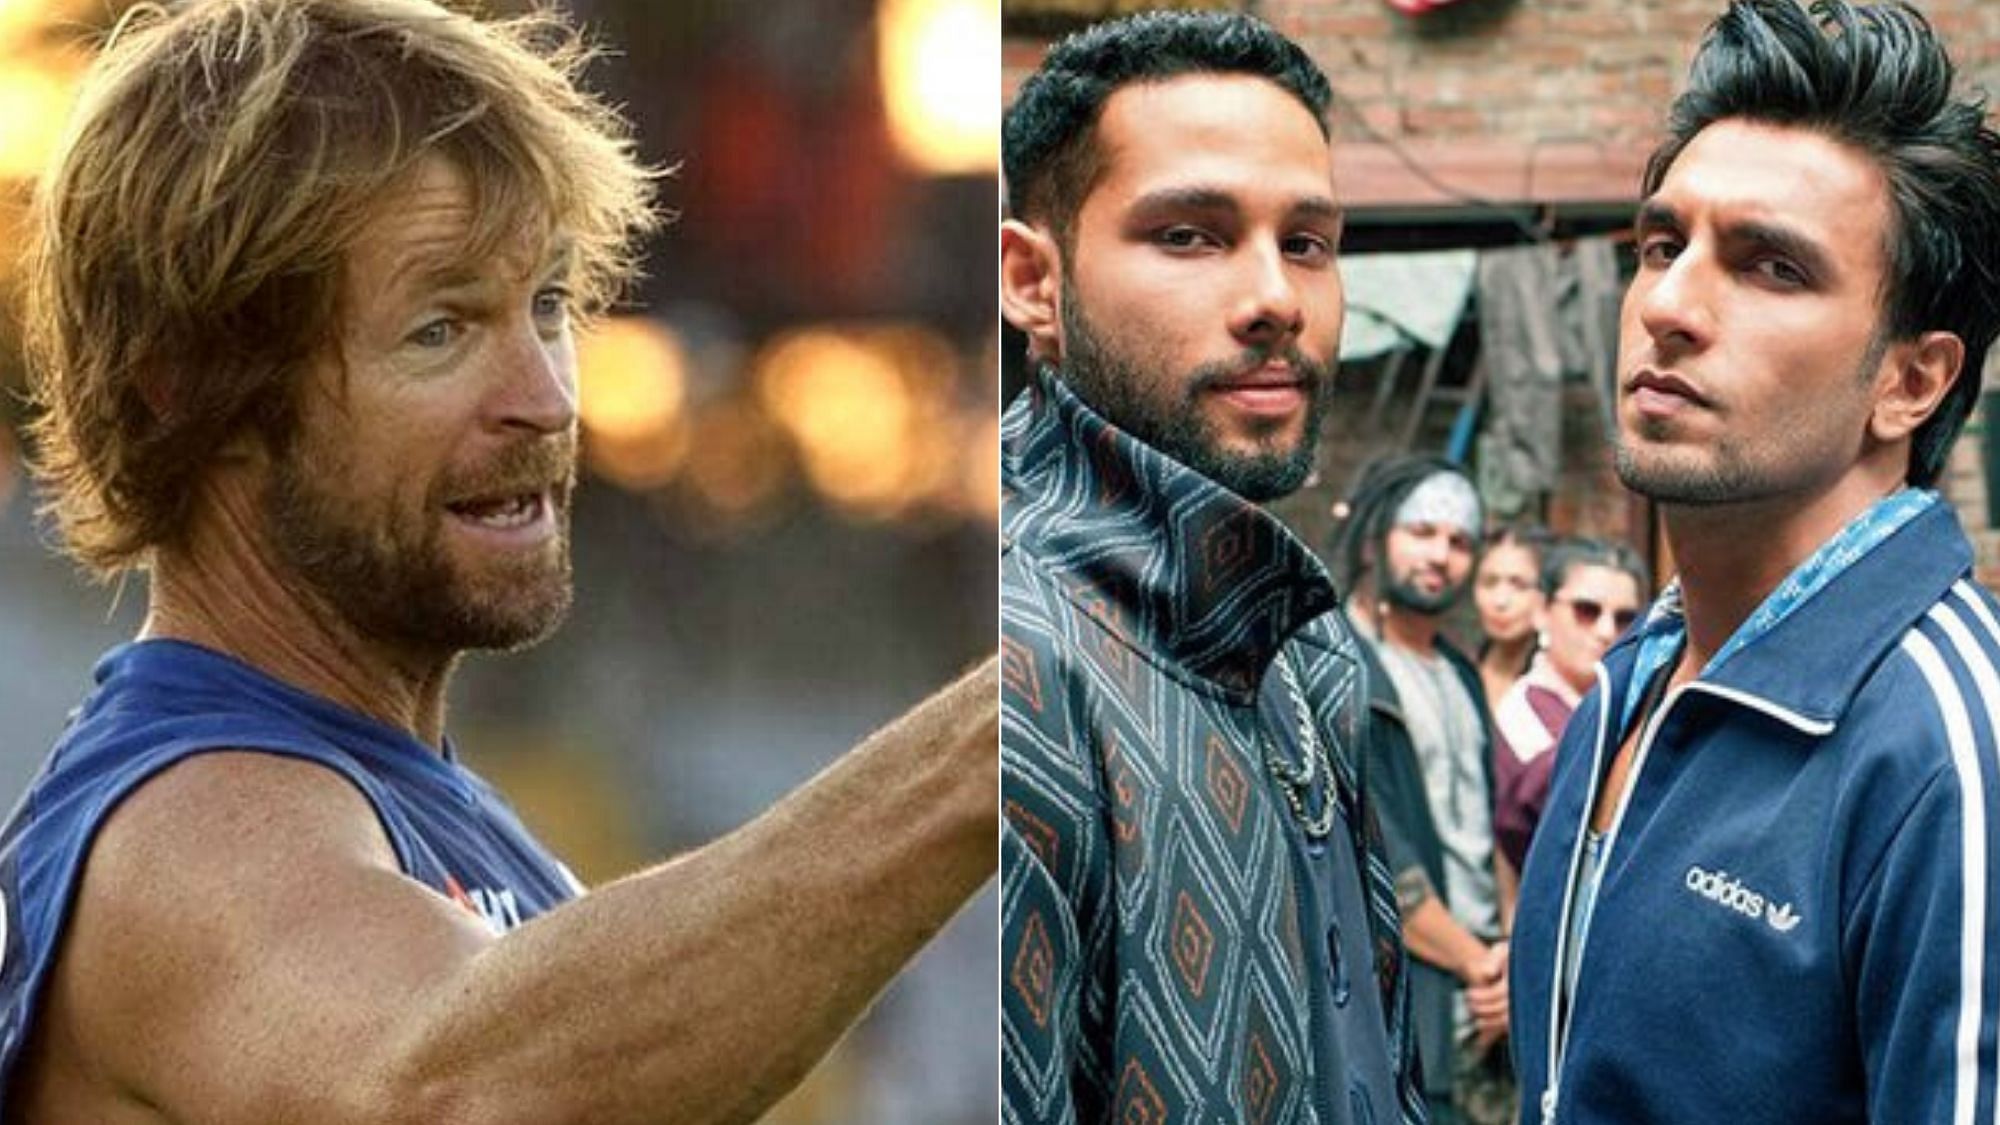 South African fielding great Jonty Rhodes finally got to watch the Ranveer Singh starrer “Gully Boy”, which made him laugh, cry and gave him goosebumps.